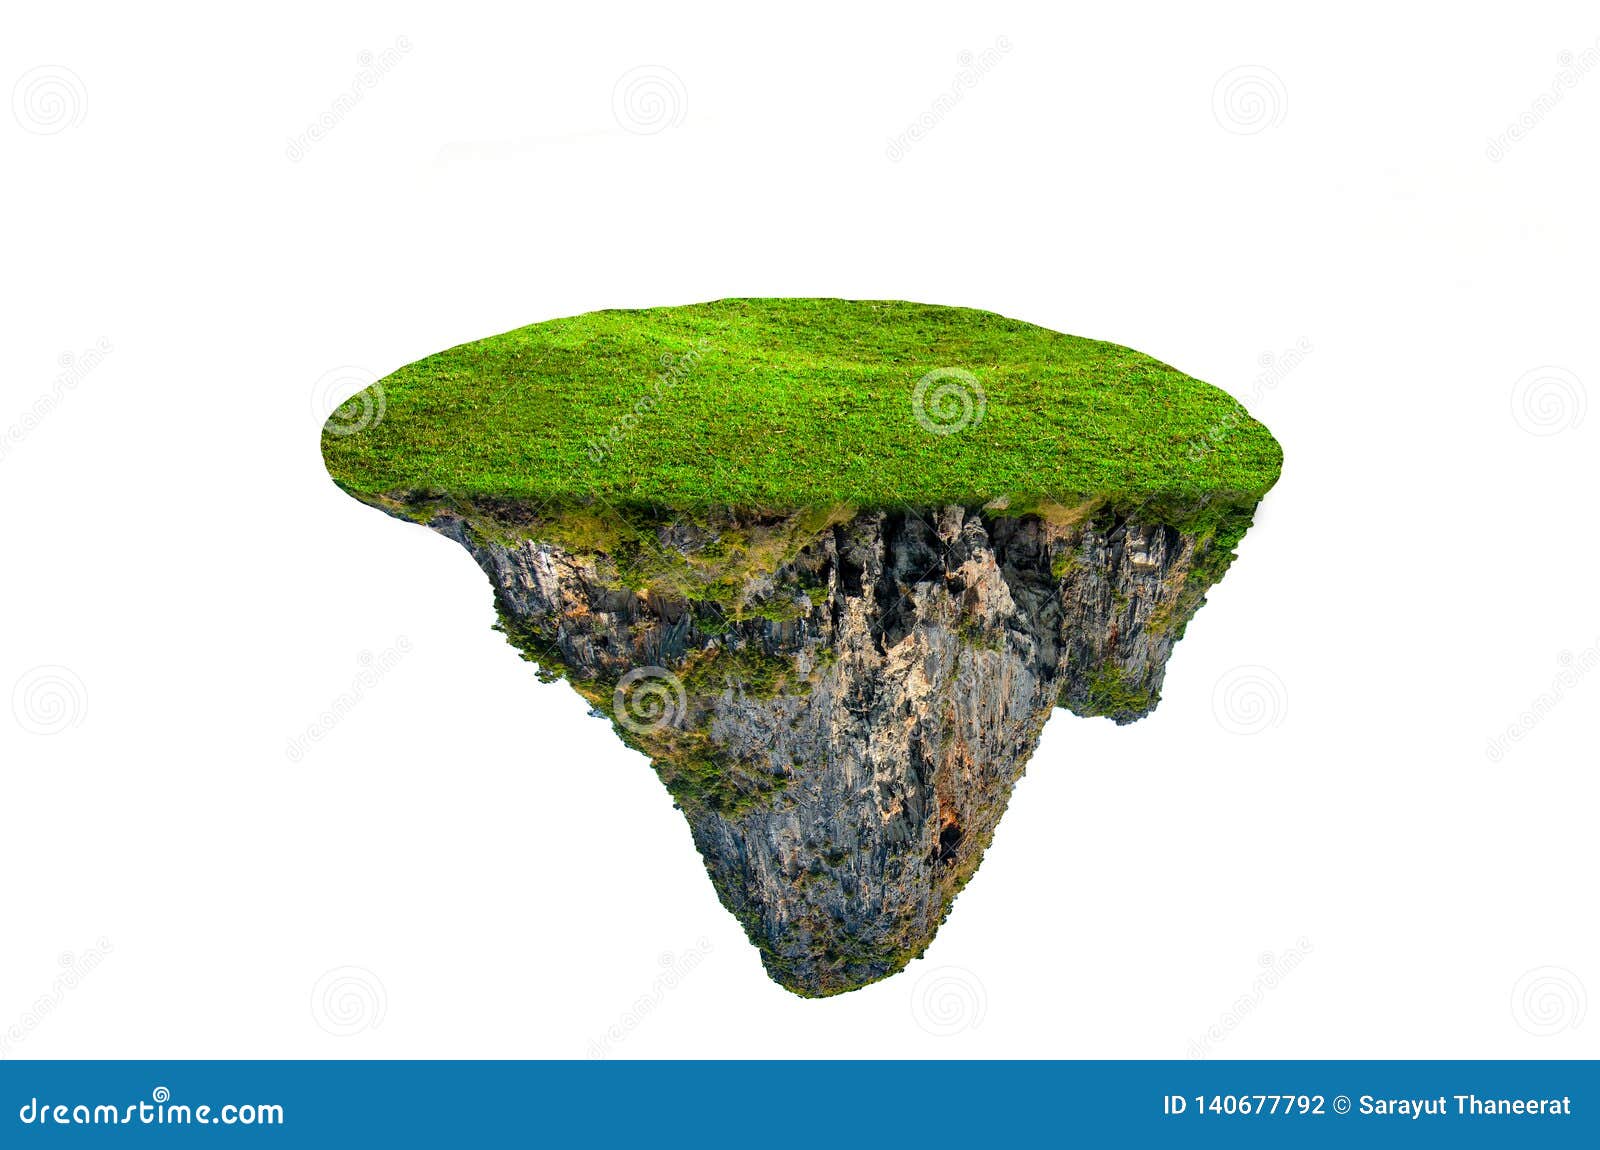 fantasy floating island with natural grass isolate